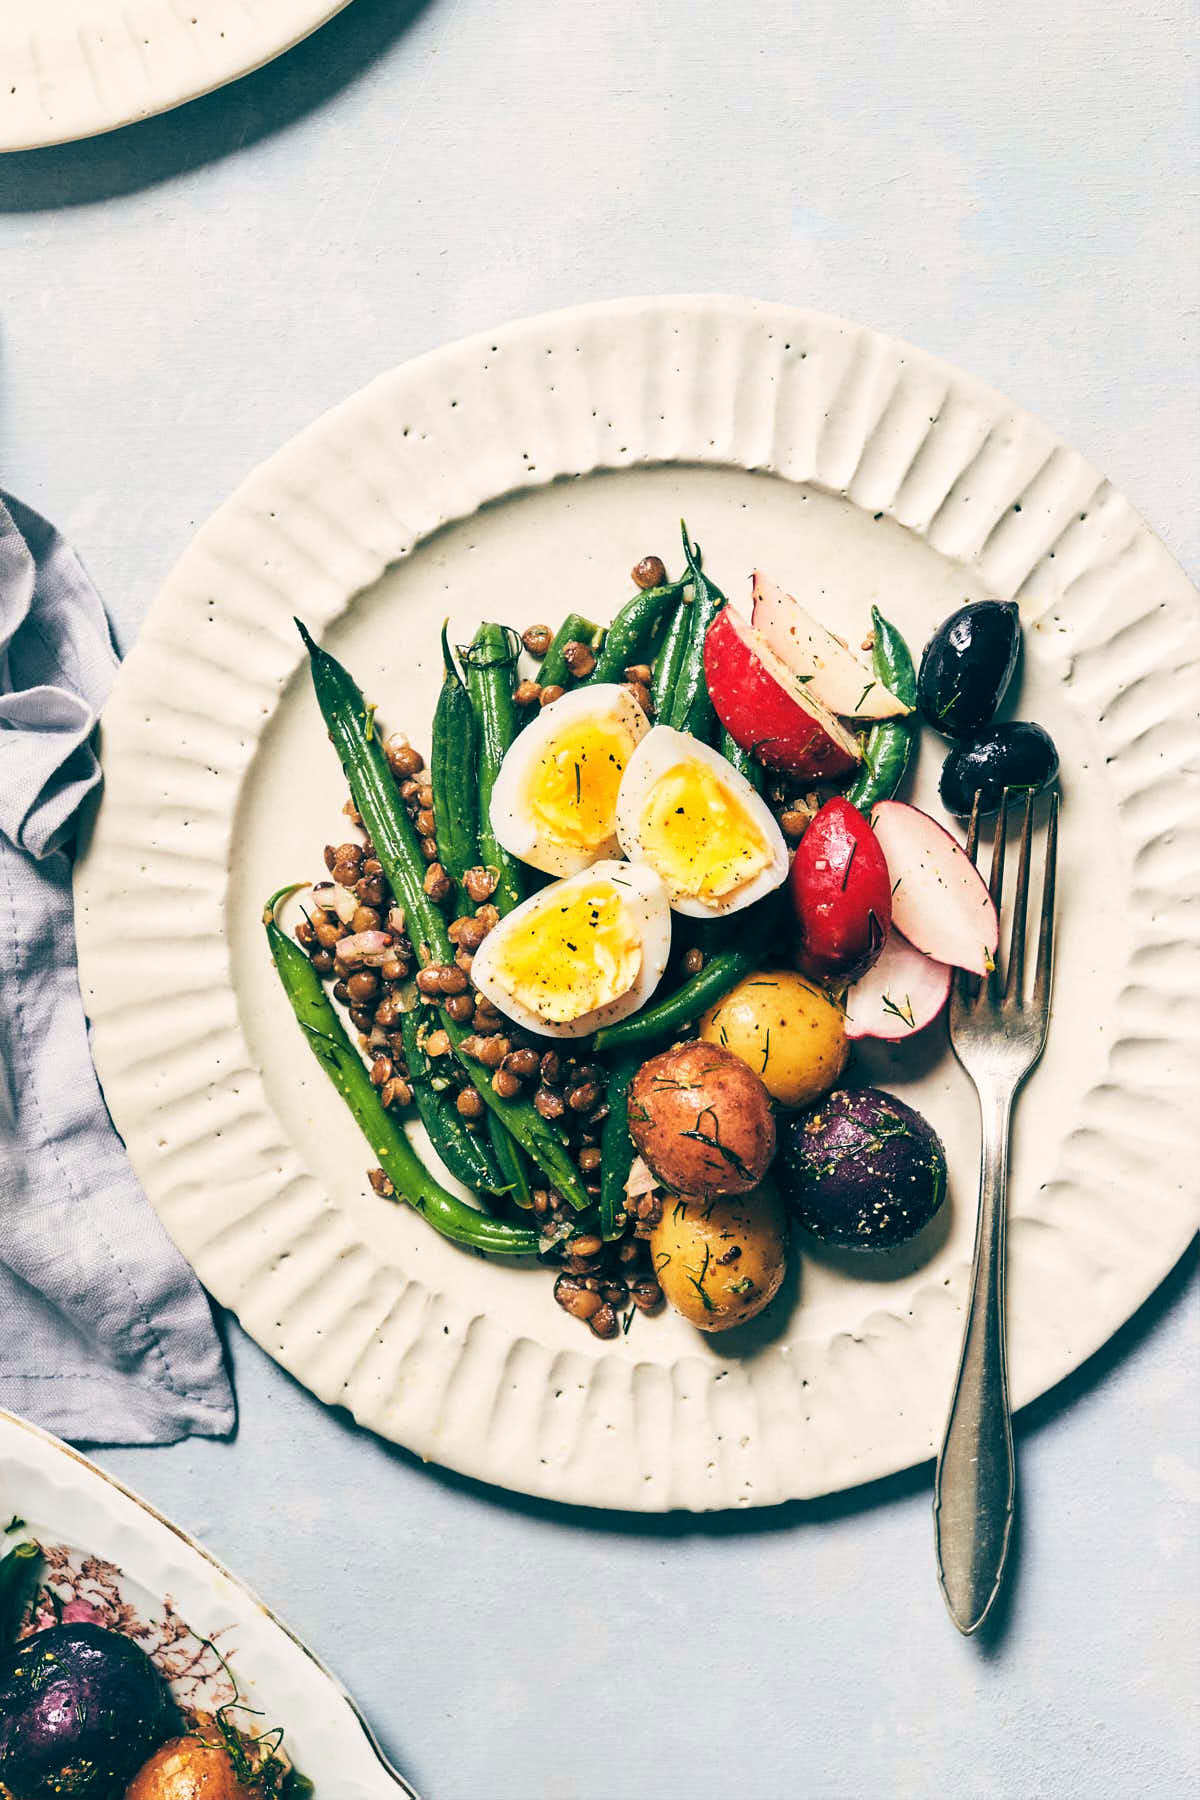 Plate of nicoise salad with egg, green beans and black olives